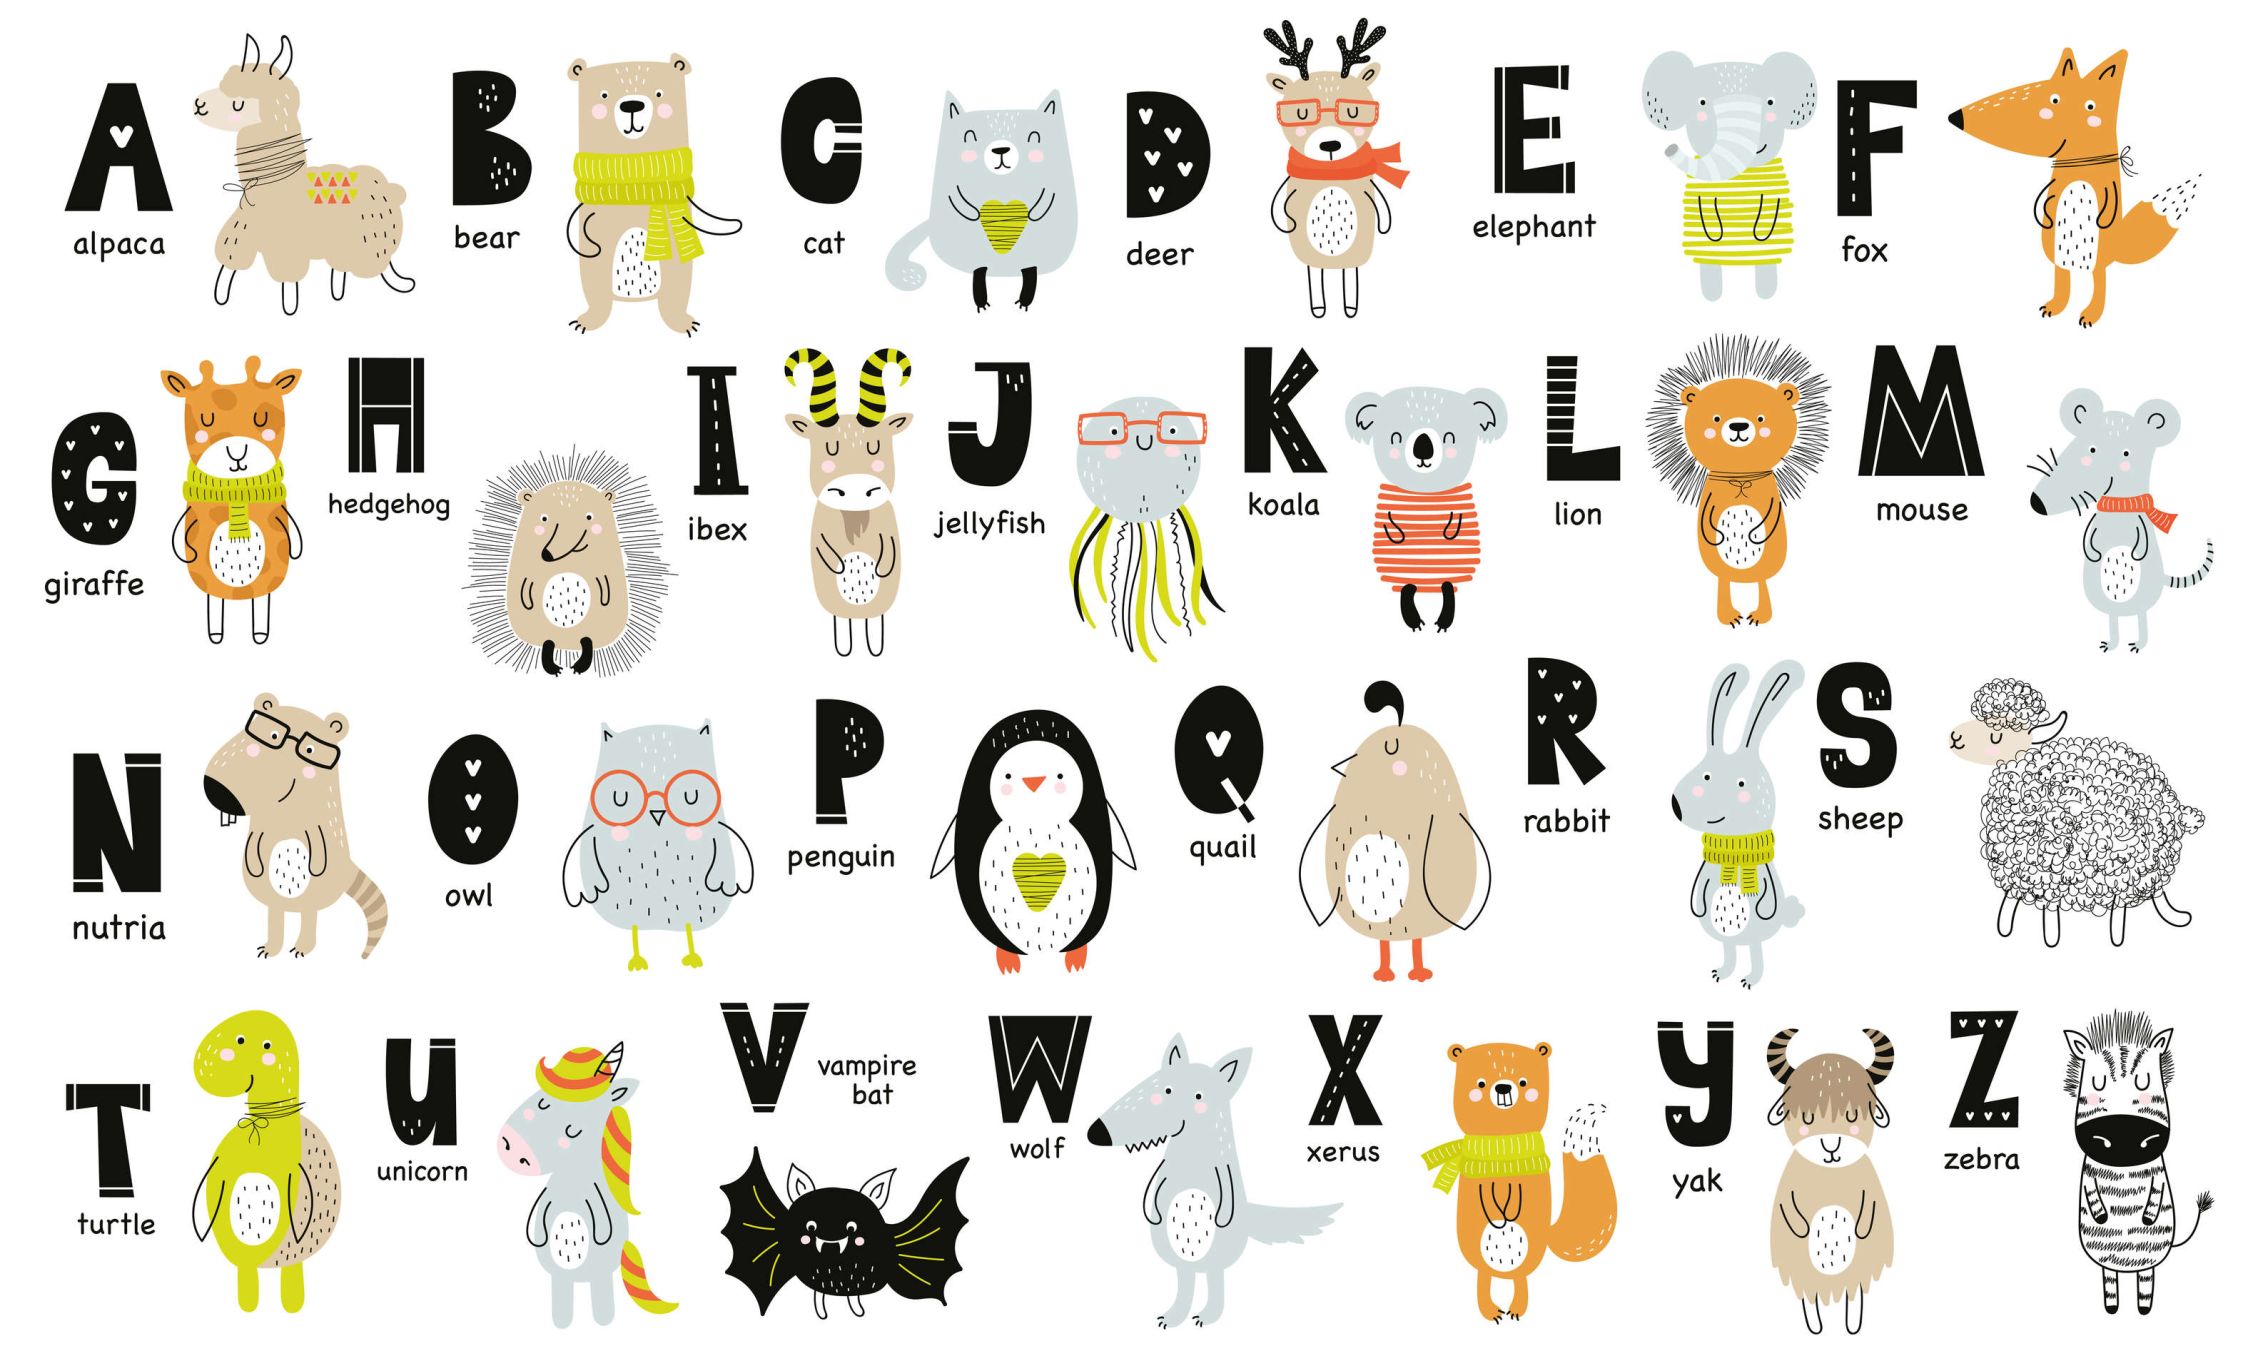             Photo wallpaper Alphabet with animals and animal names - Smooth & slightly shiny non-woven
        